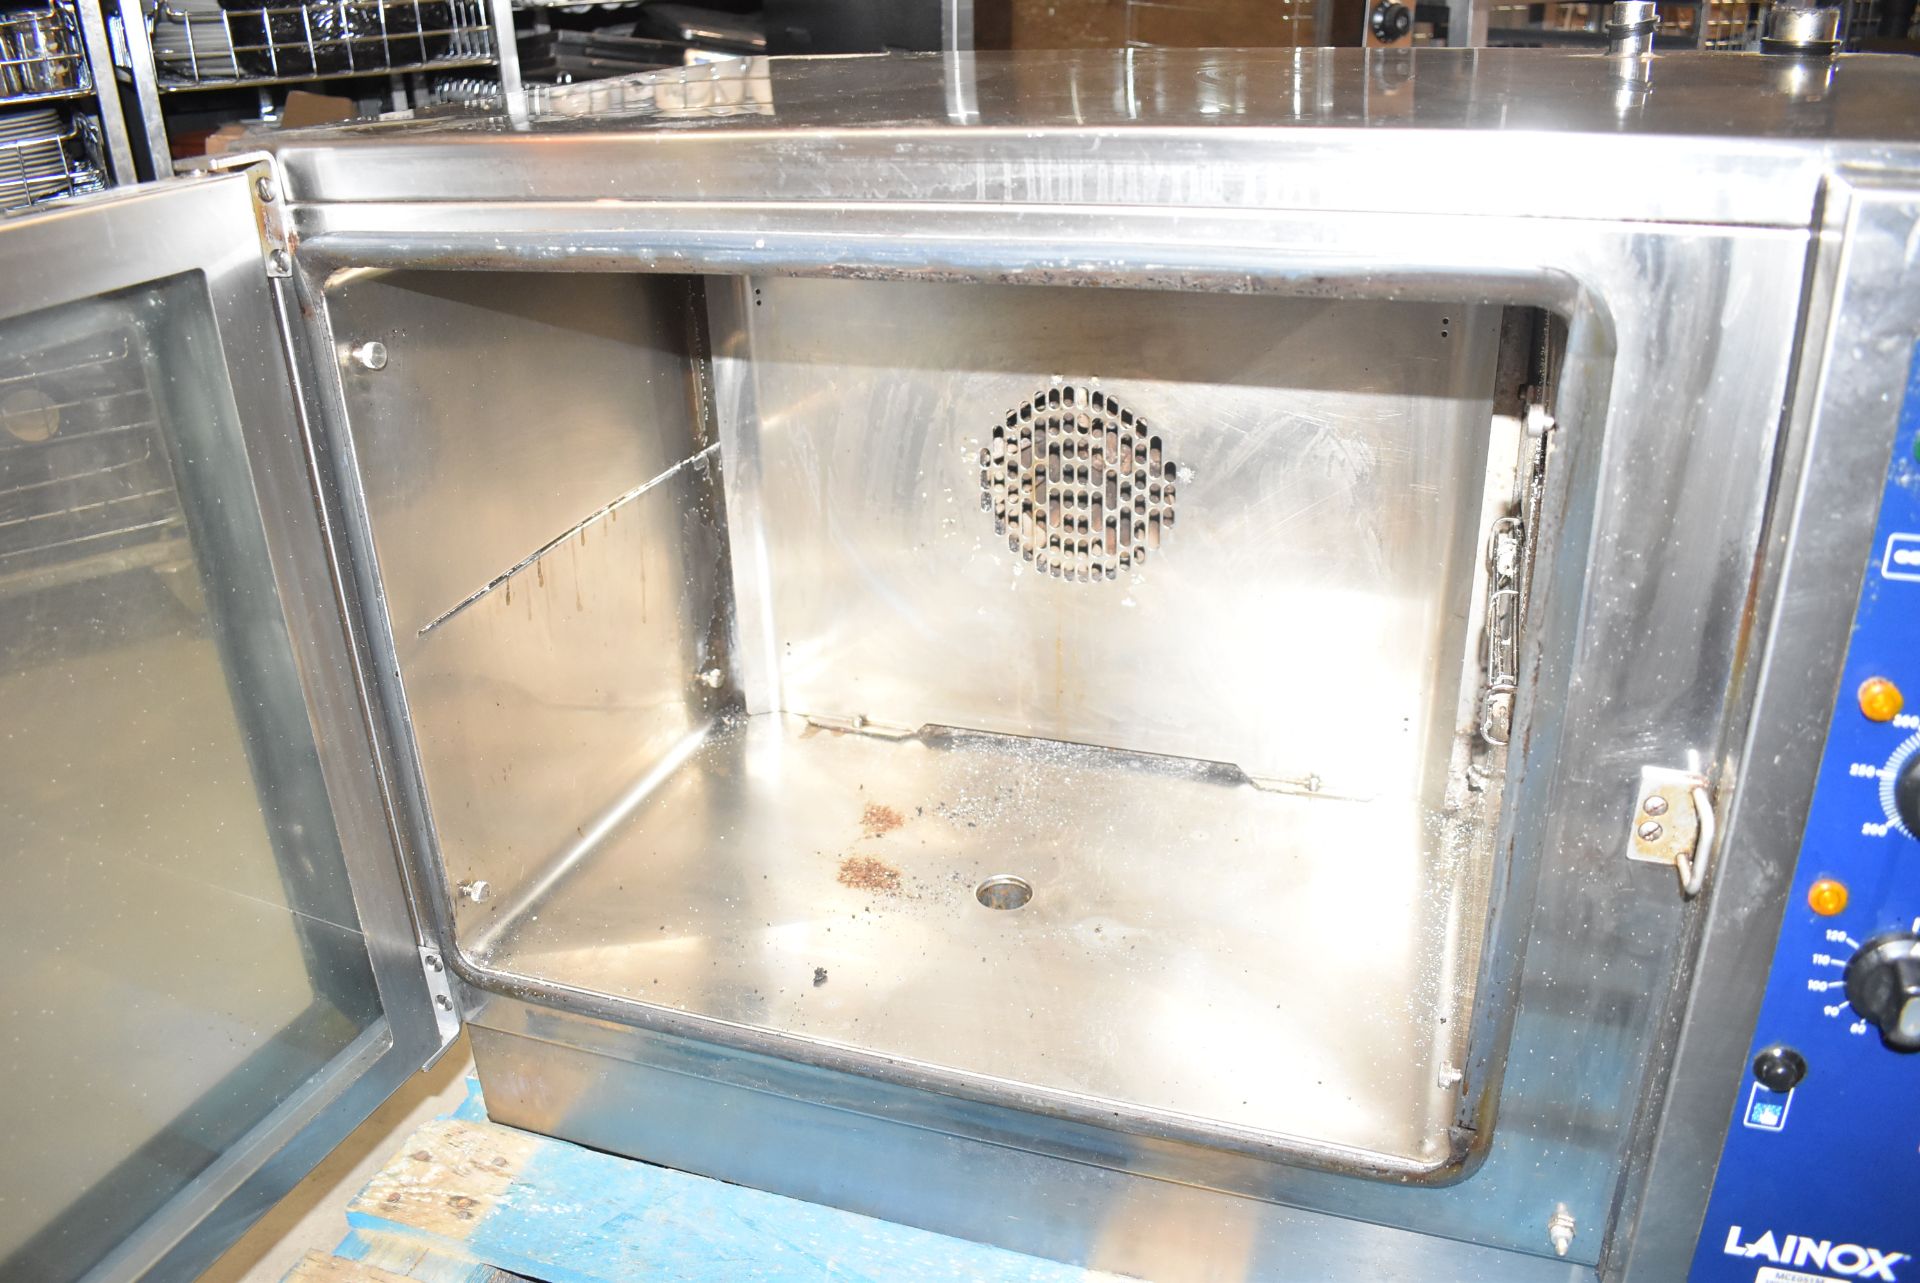 1 x Lainox MCE051M Commercial Electric 400v Convection Oven With Stainless Steel Exterior - Recently - Image 4 of 9